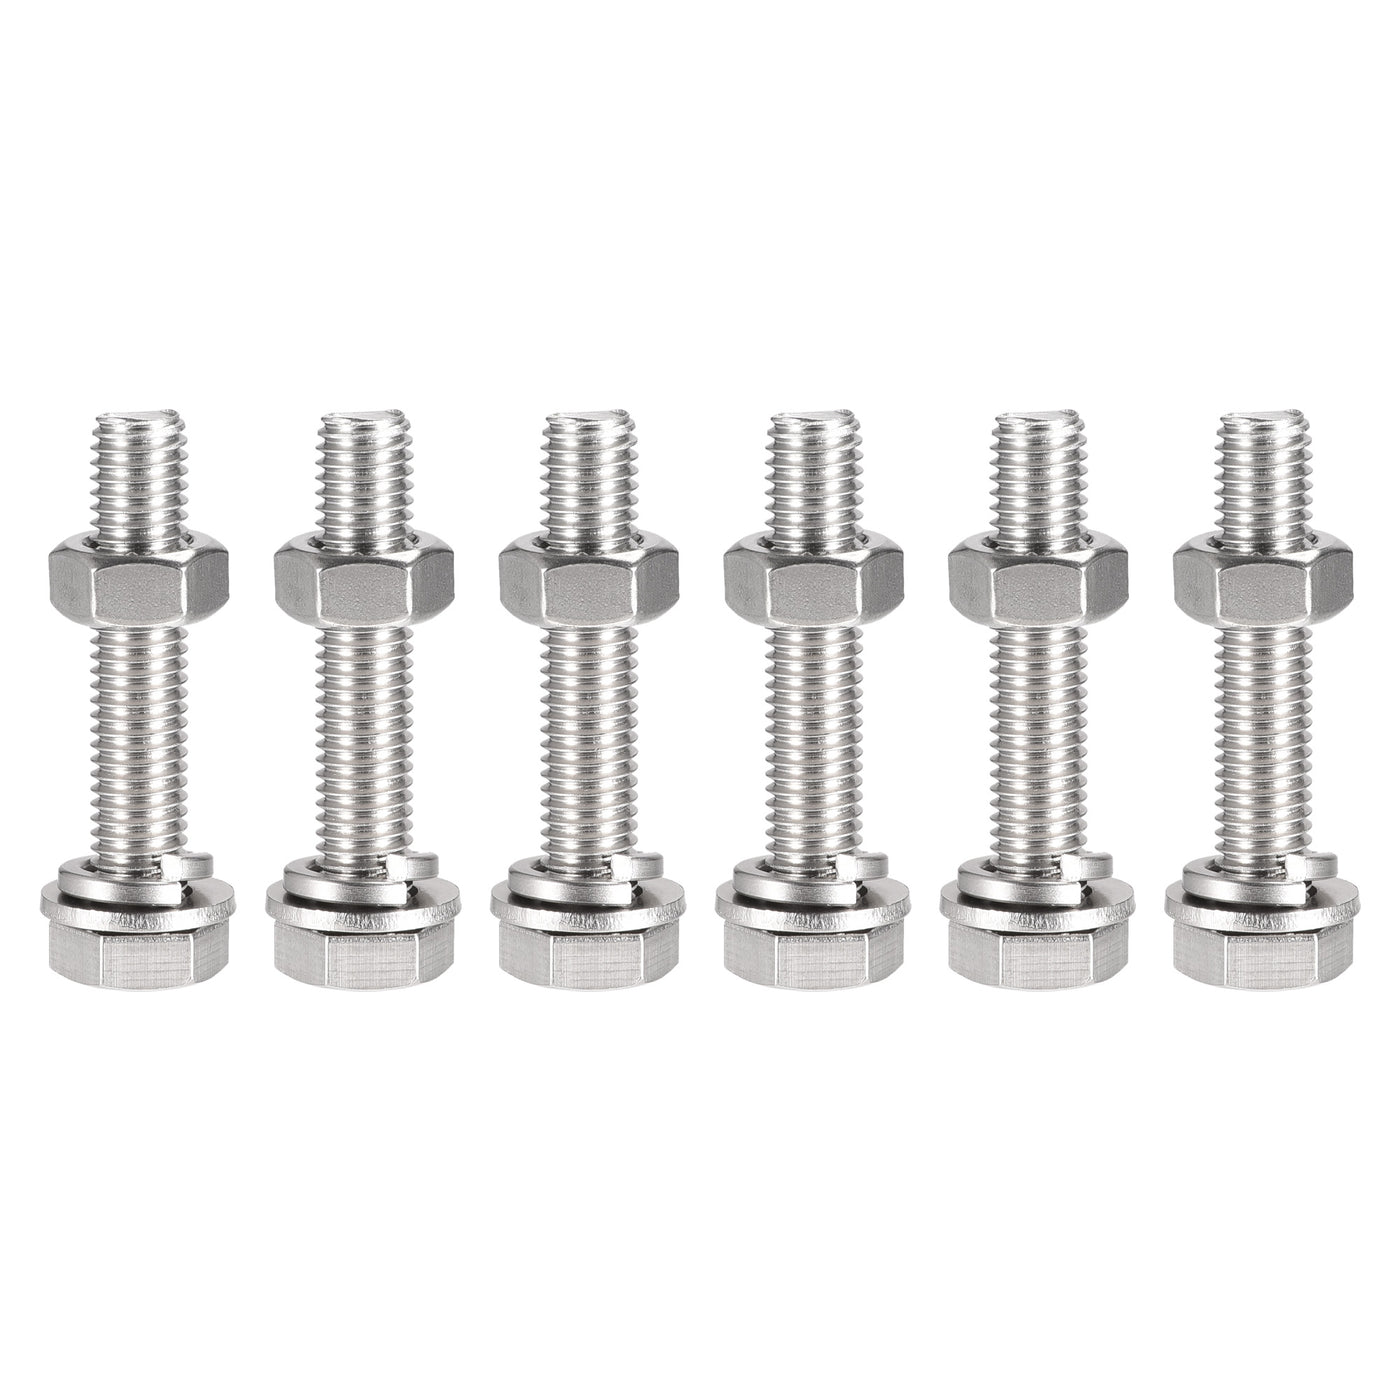 uxcell Uxcell Hex Head Screw Bolts, Nuts, Flat & Lock Washers Kits, 304 Stainless Steel Fully Thread Hexagon Bolts 6 Set